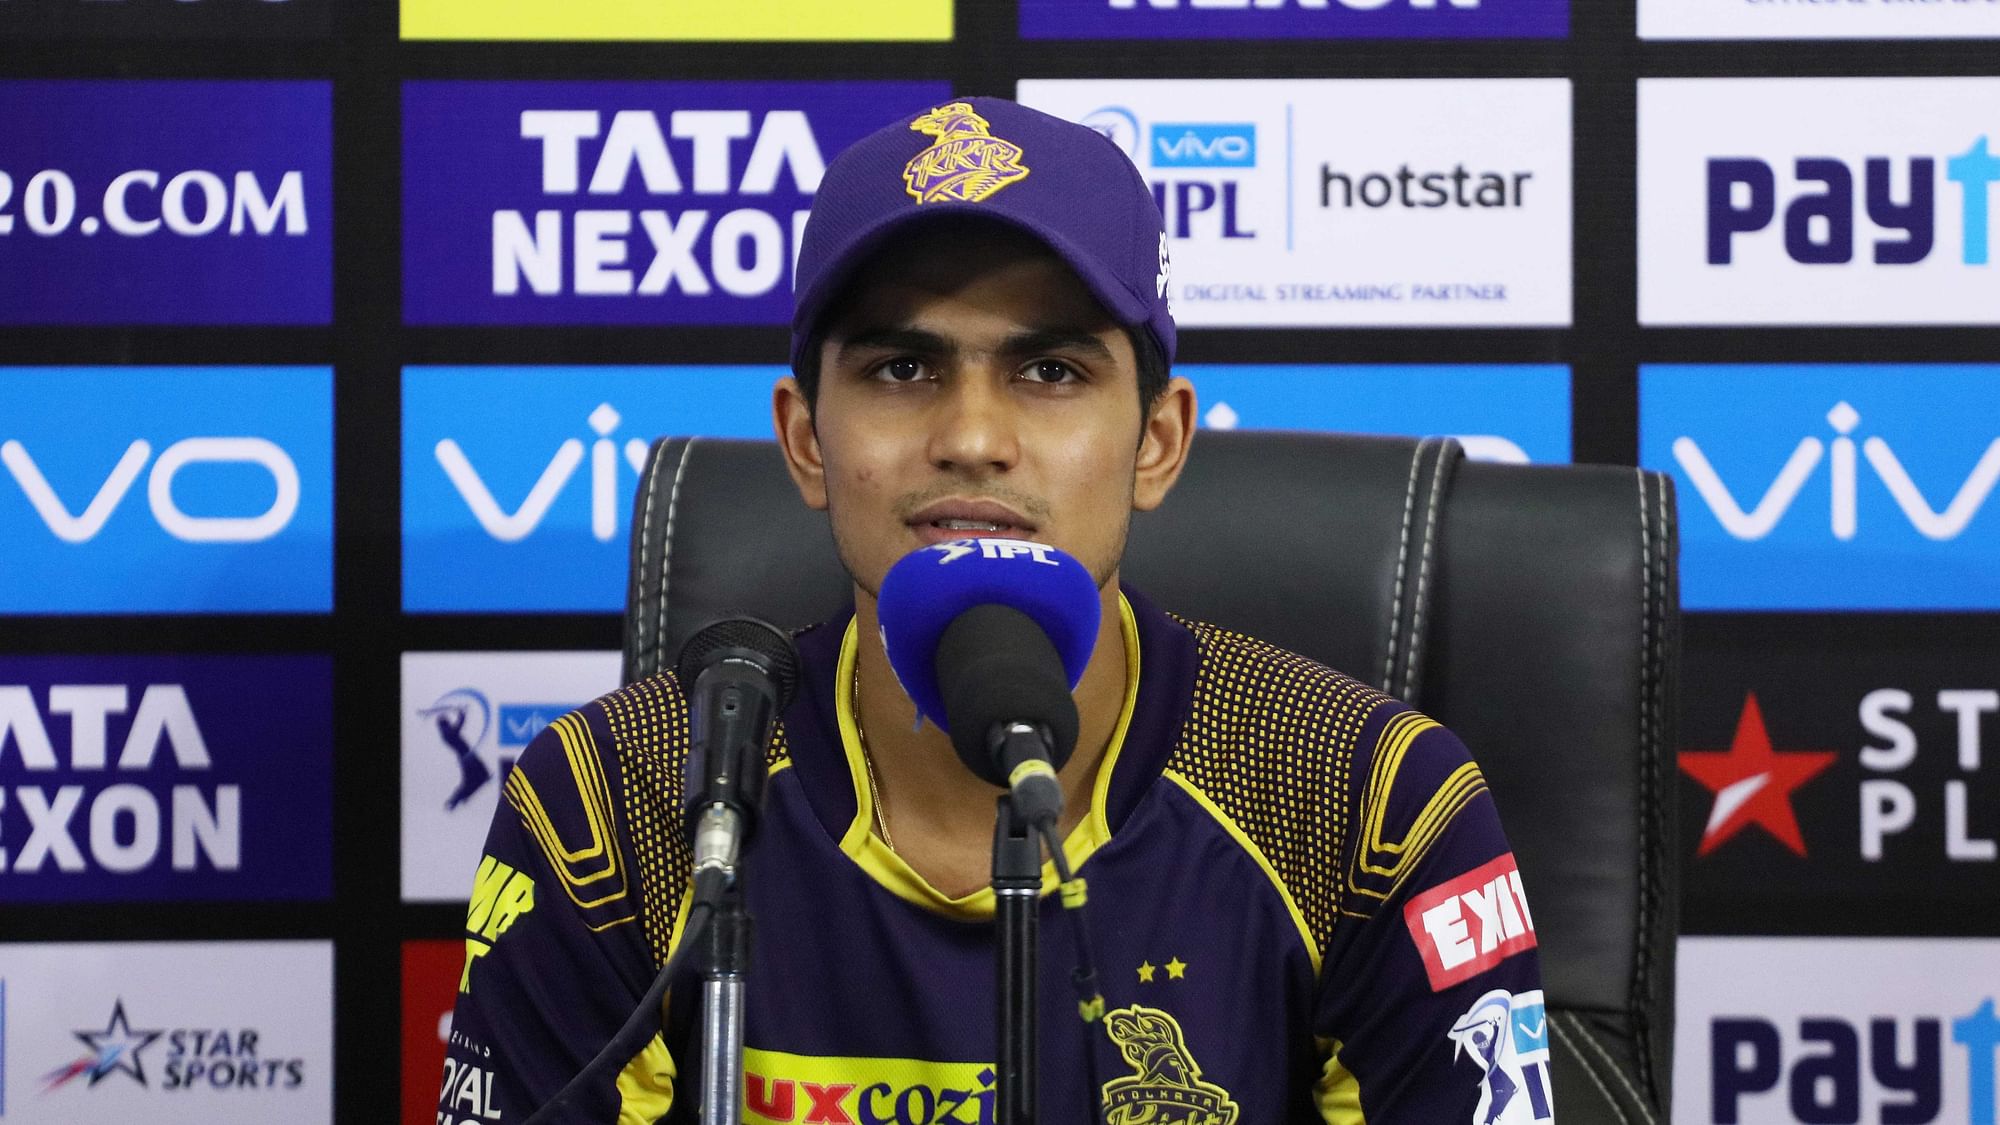 Shubman Gill of the Kolkata KnightRiders at Press Conference during match fifty four of the Vivo Indian Premier League 2018 (IPL 2018) between the Sunrisers Hyderabad and the Kolkata Knight Riders held at the Rajiv Gandhi International Cricket Stadium in Hyderabad on the 19th May 2018.